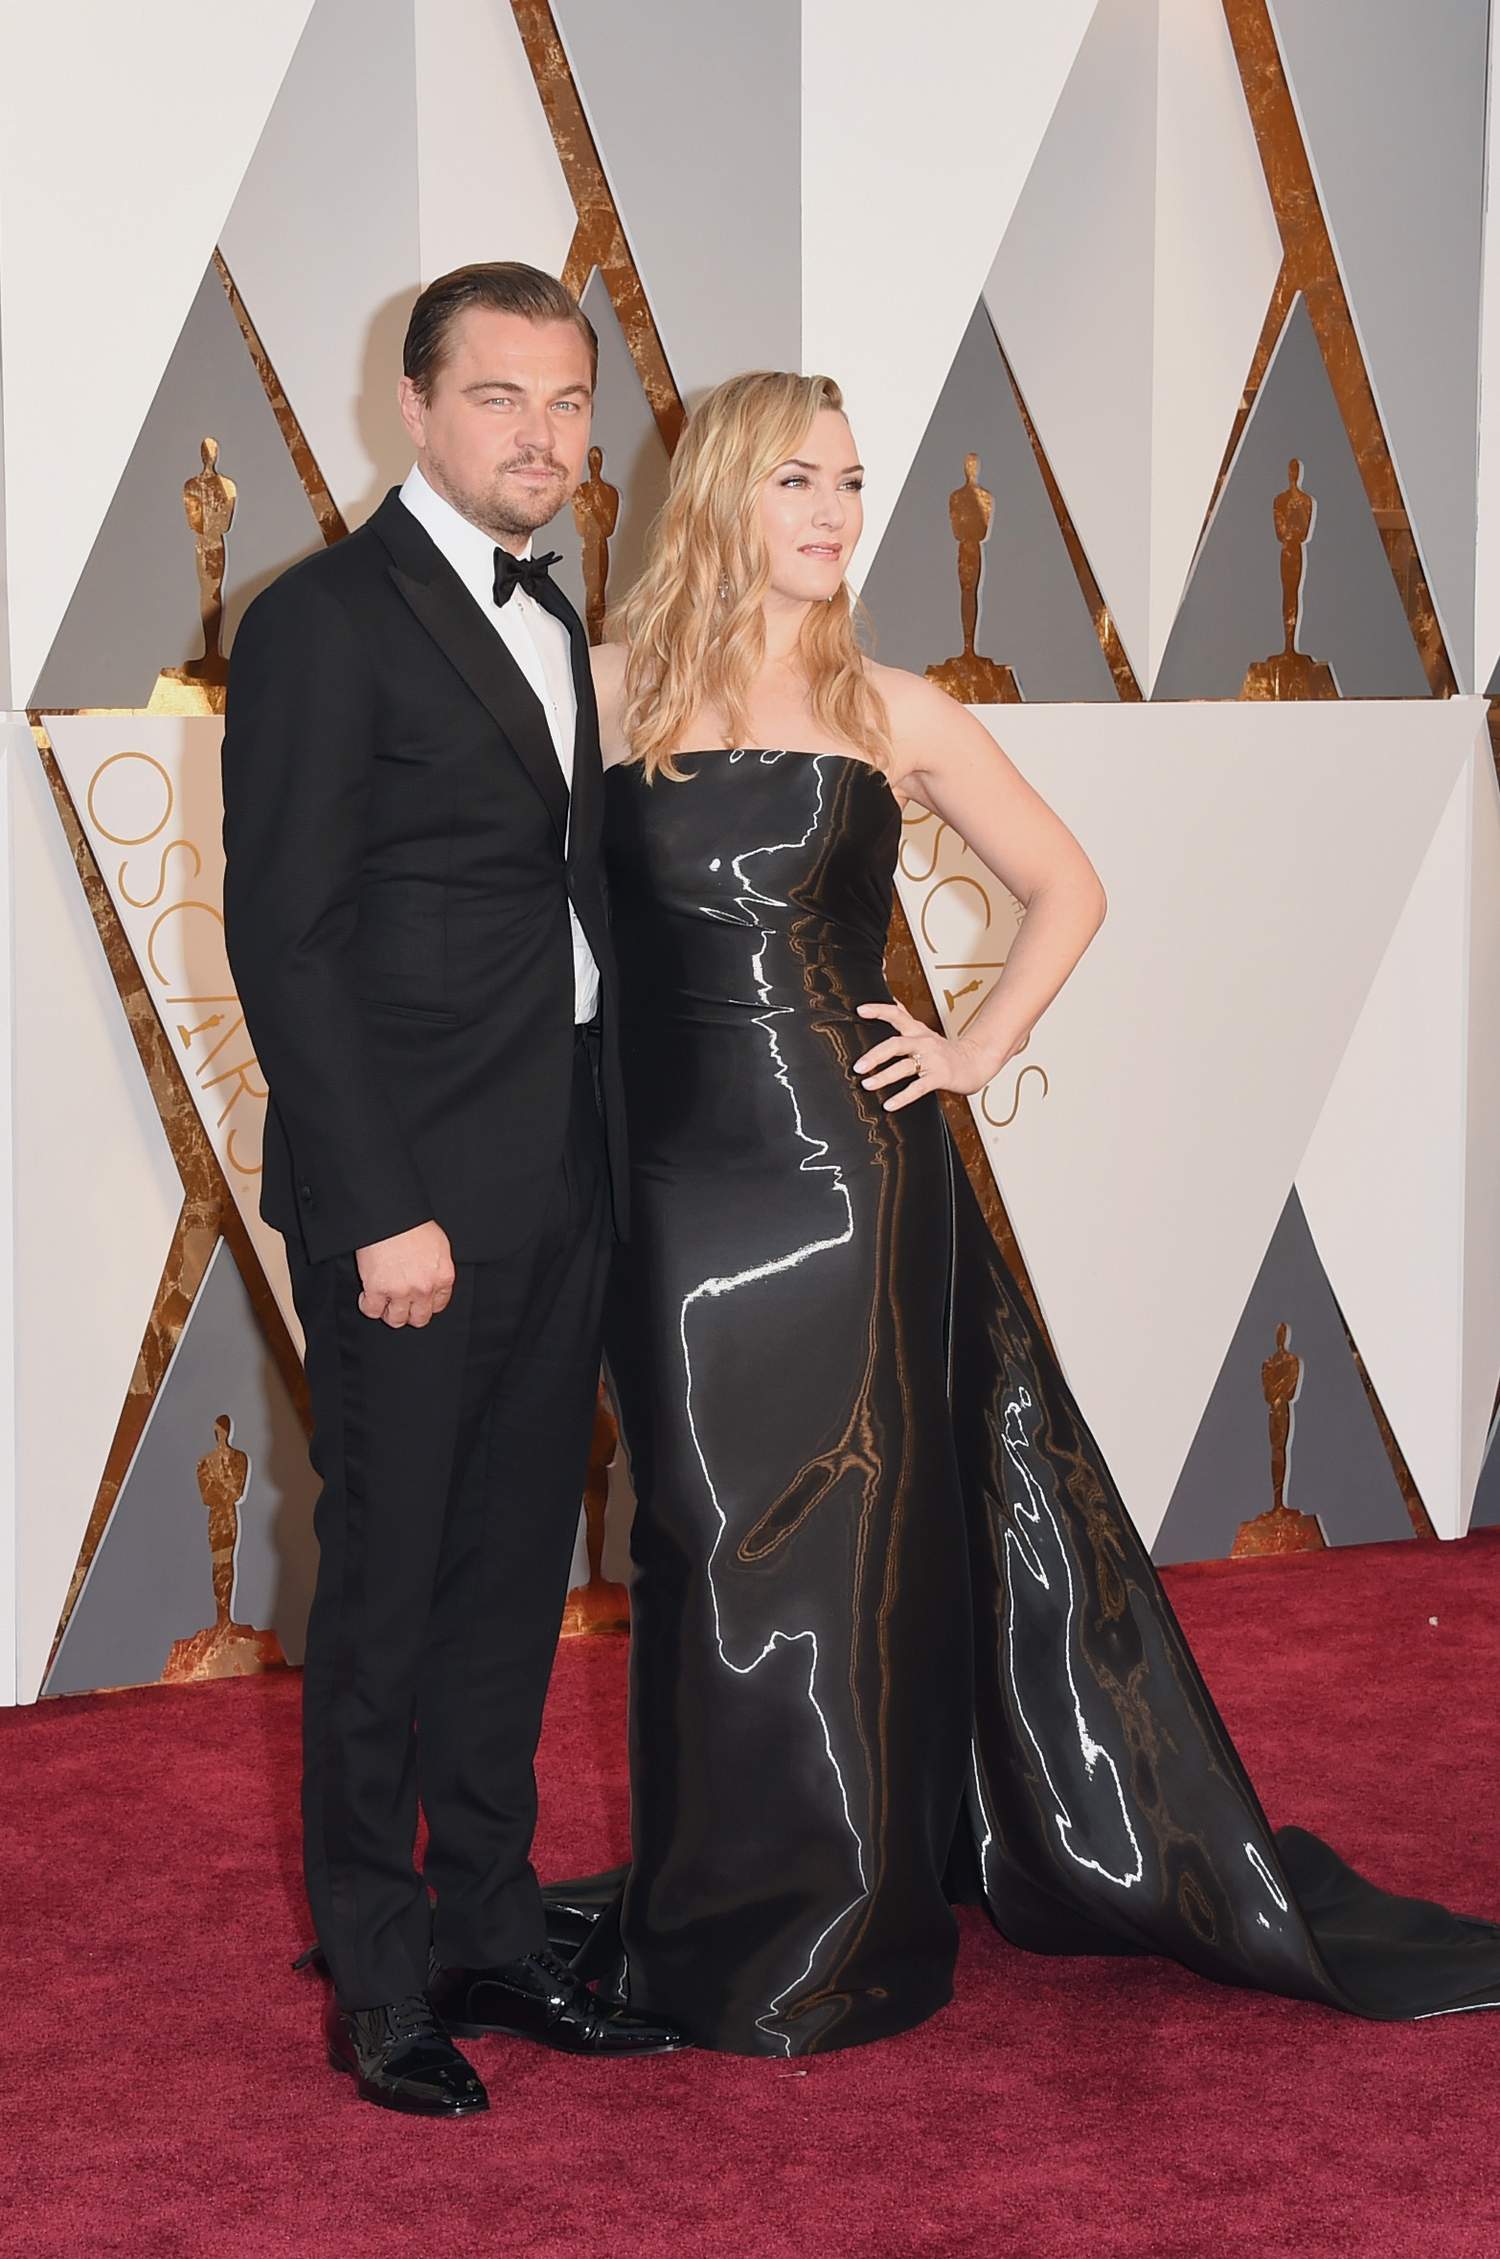 Leonard Dicaprio and Kate Winslet at Annual Academy Awards